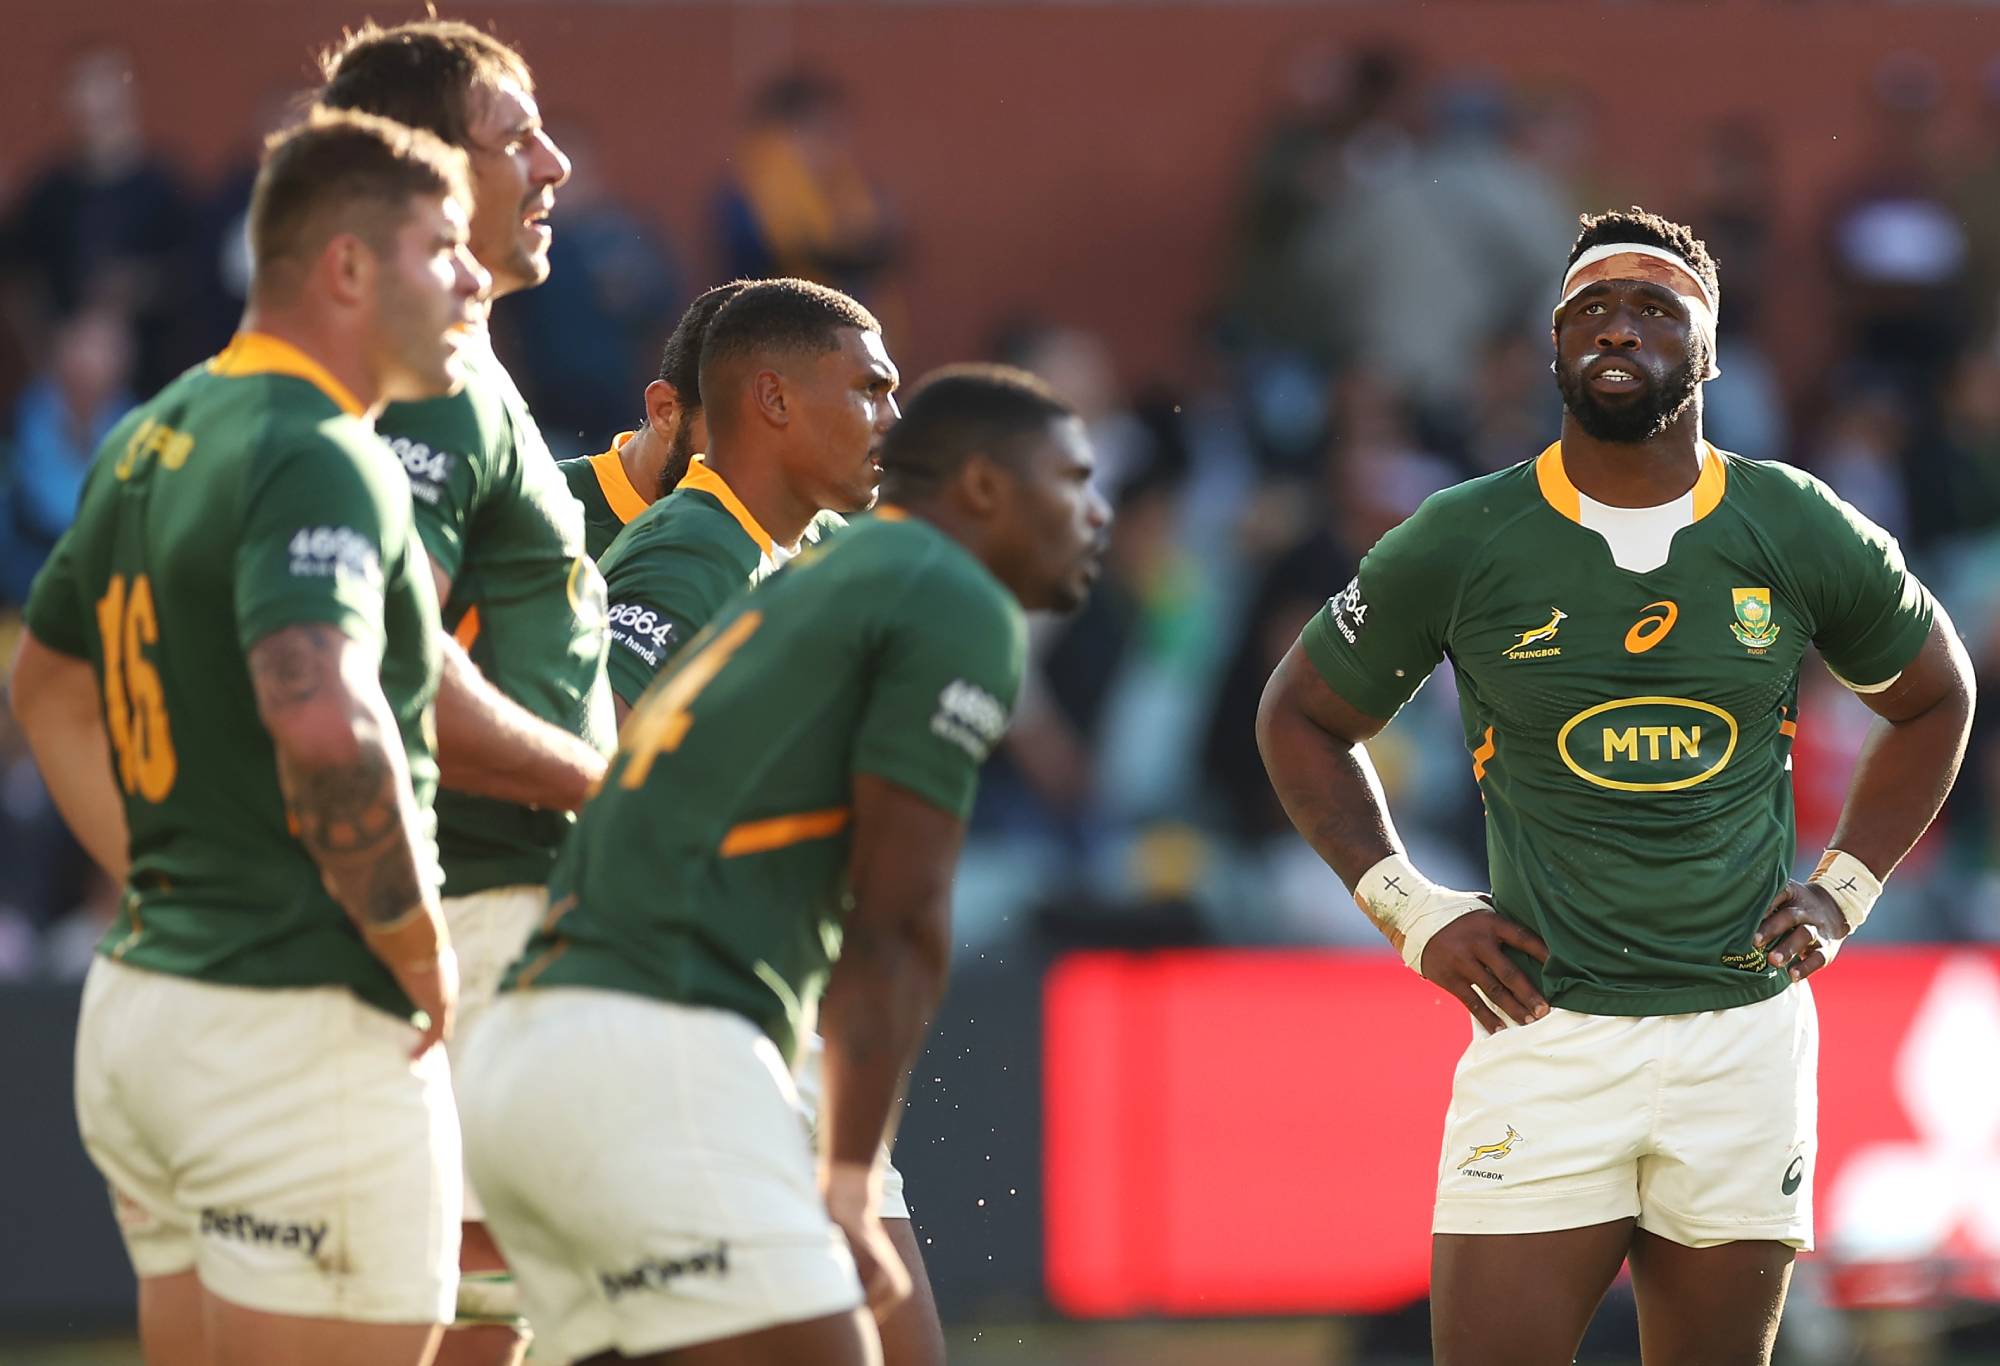 Siya Kolisi of the Springboks looks dejected after a try during The Rugby Championship match between the Australian Wallabies and the South African Springboks at Adelaide Oval on August 27, 2022 in Adelaide, Australia. (Photo by Mark Kolbe/Getty Images)